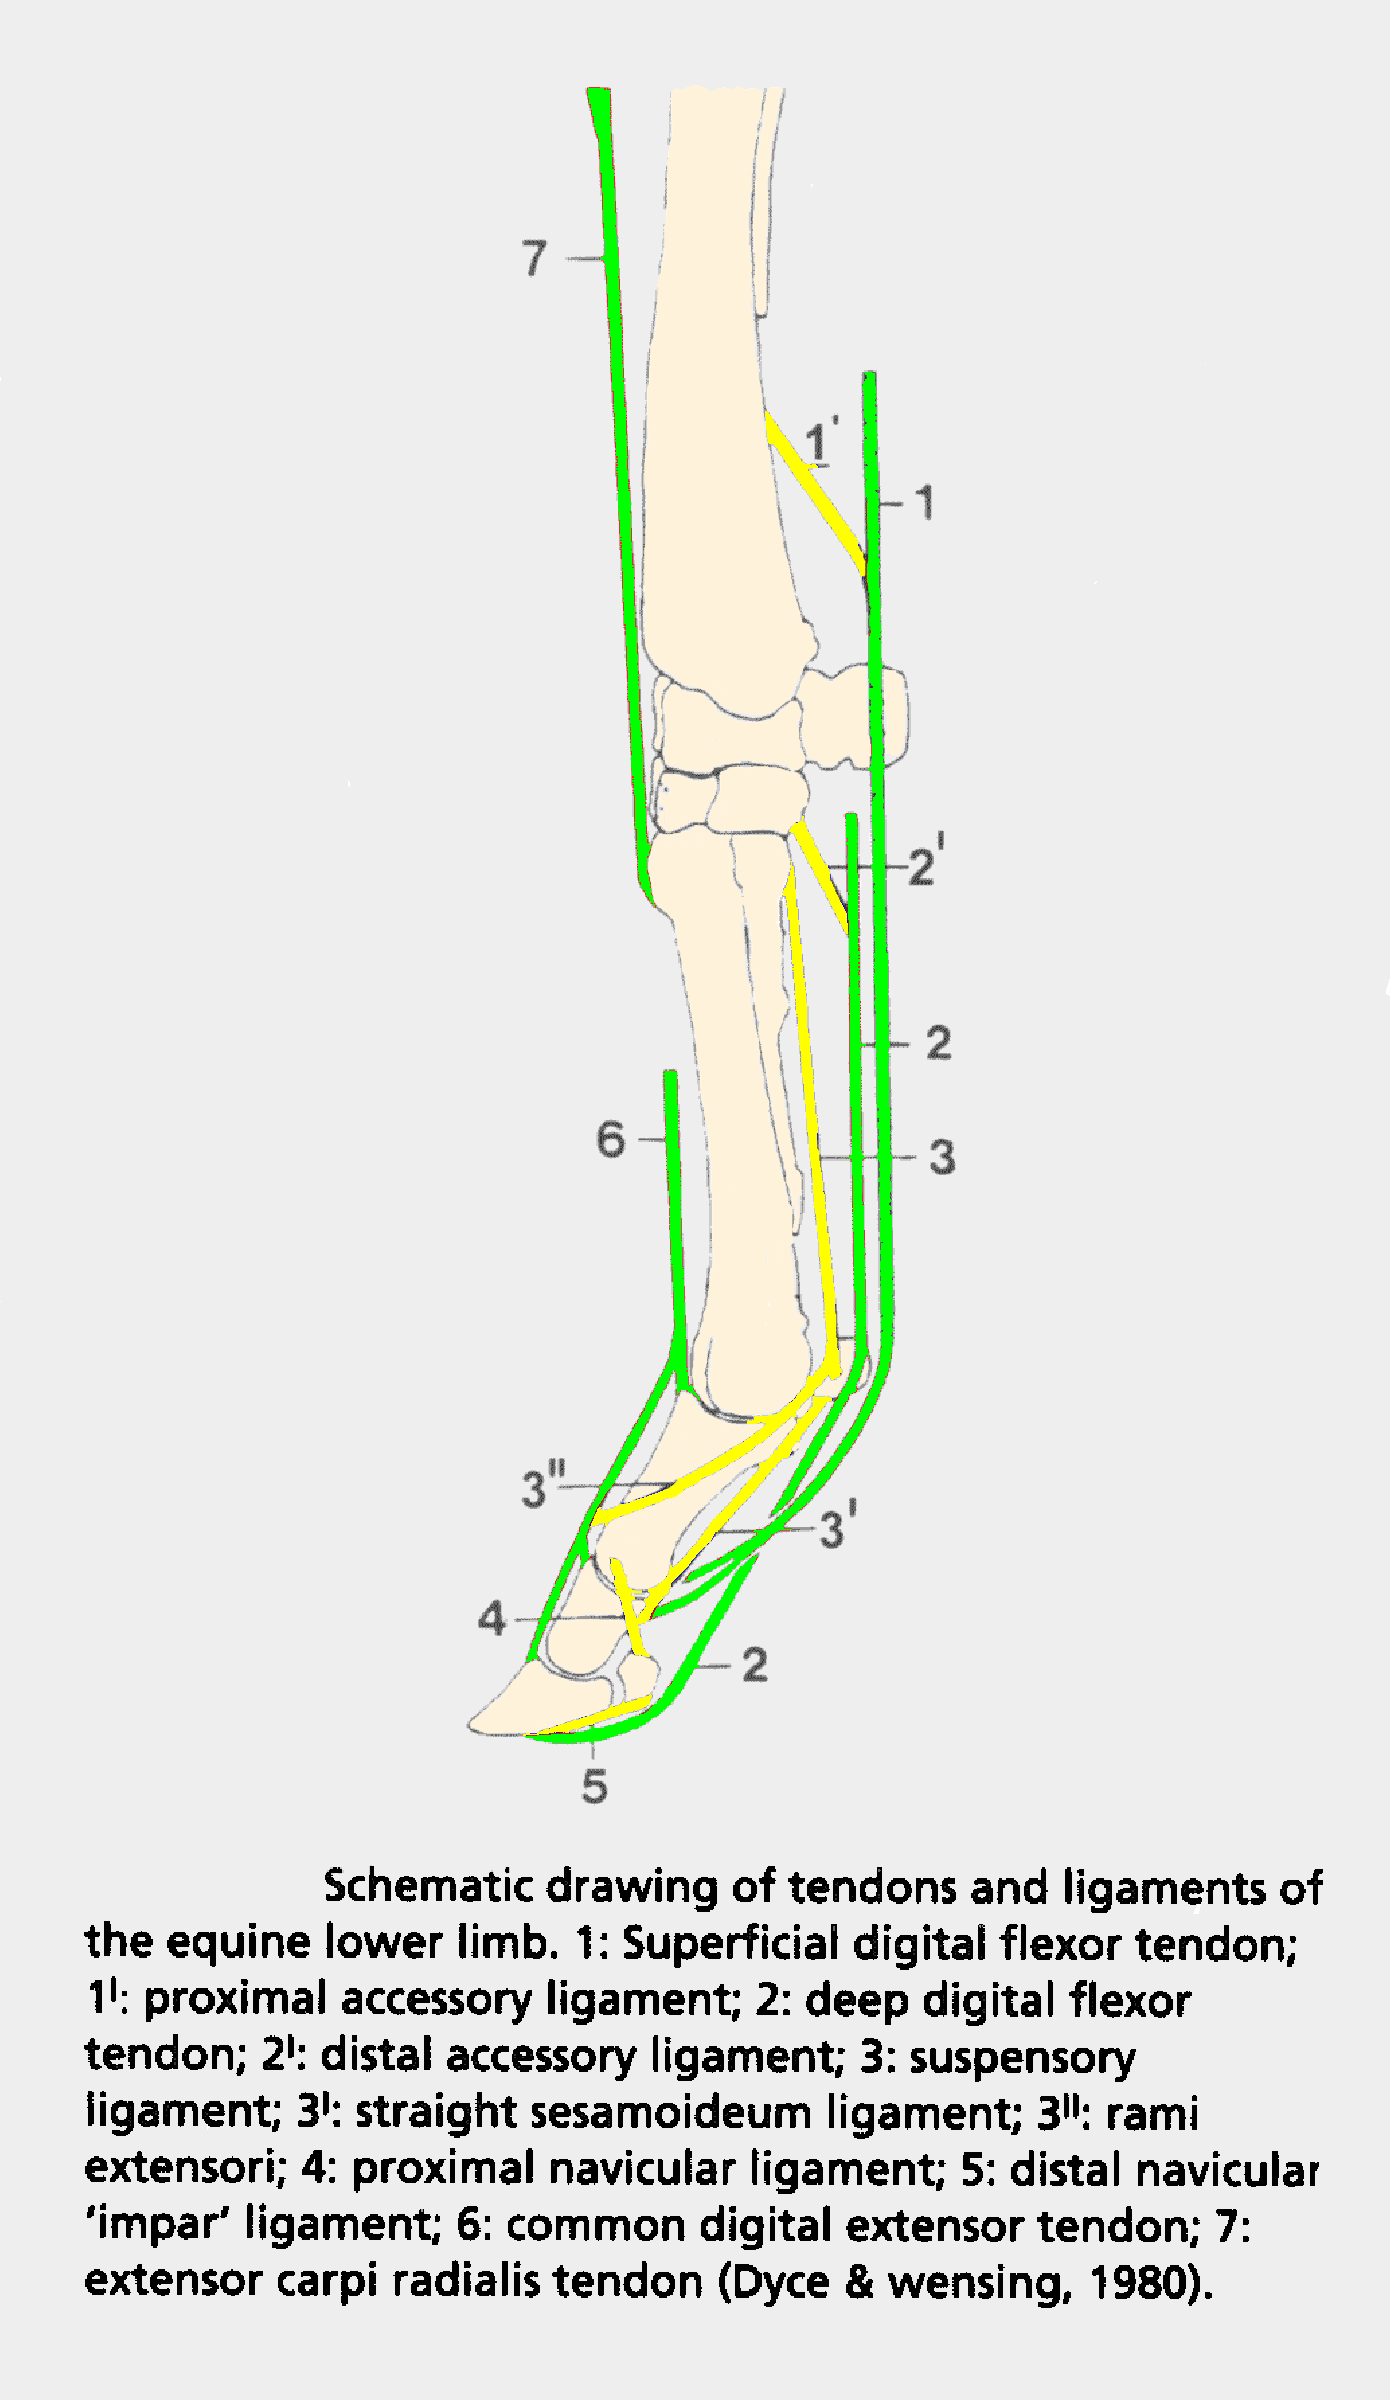 Diagram of major tendons & ligaments of the lower limb